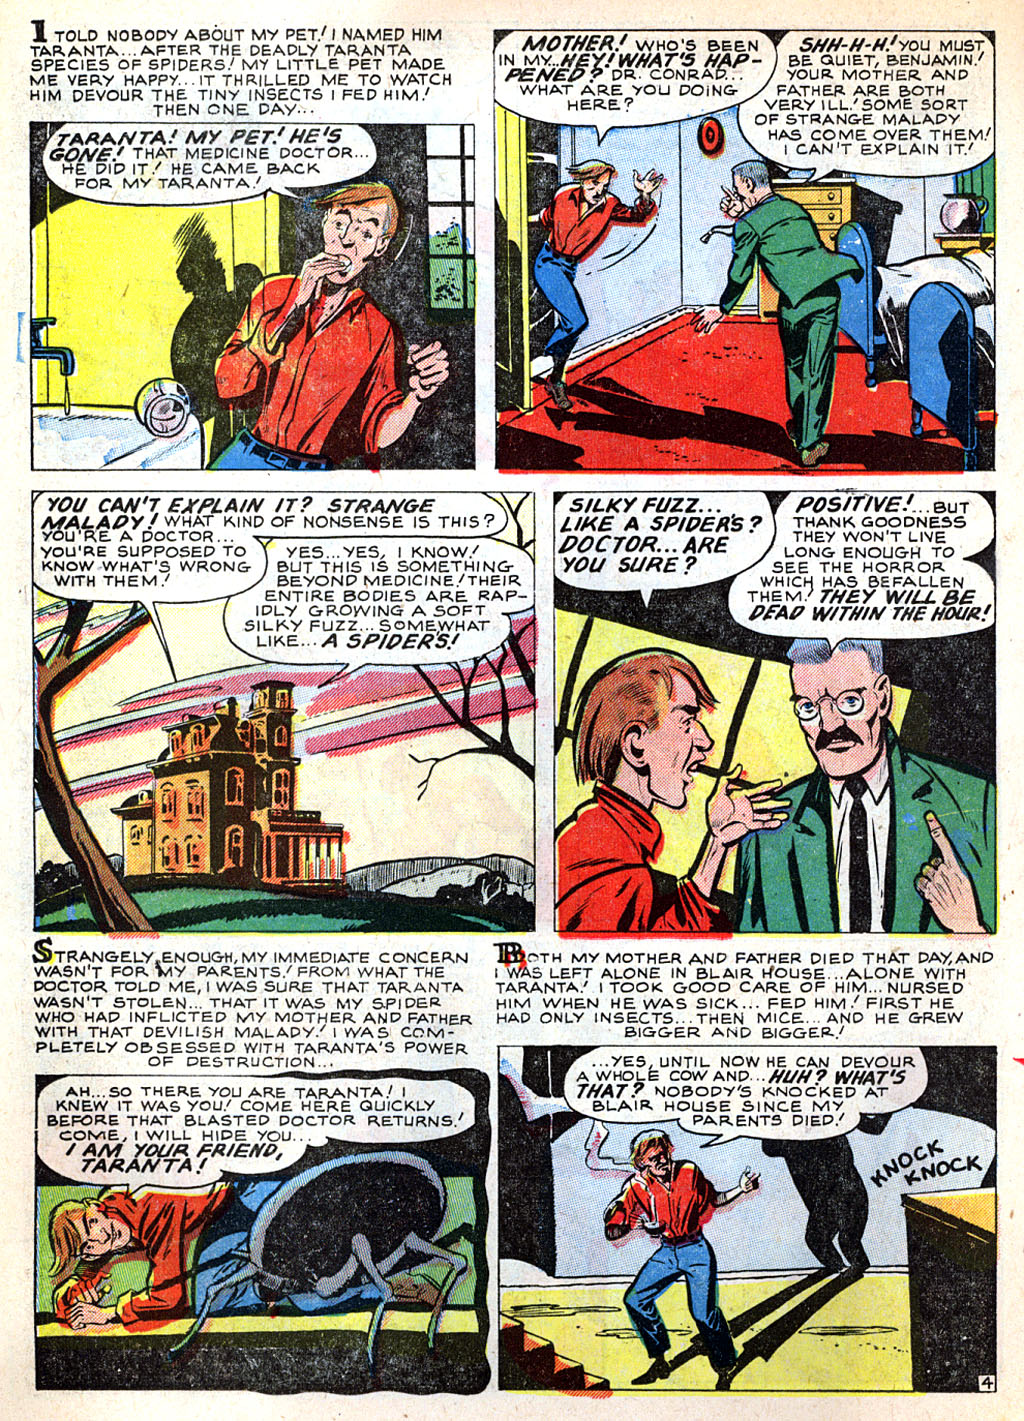 Marvel Tales (1949) 101 Page 13